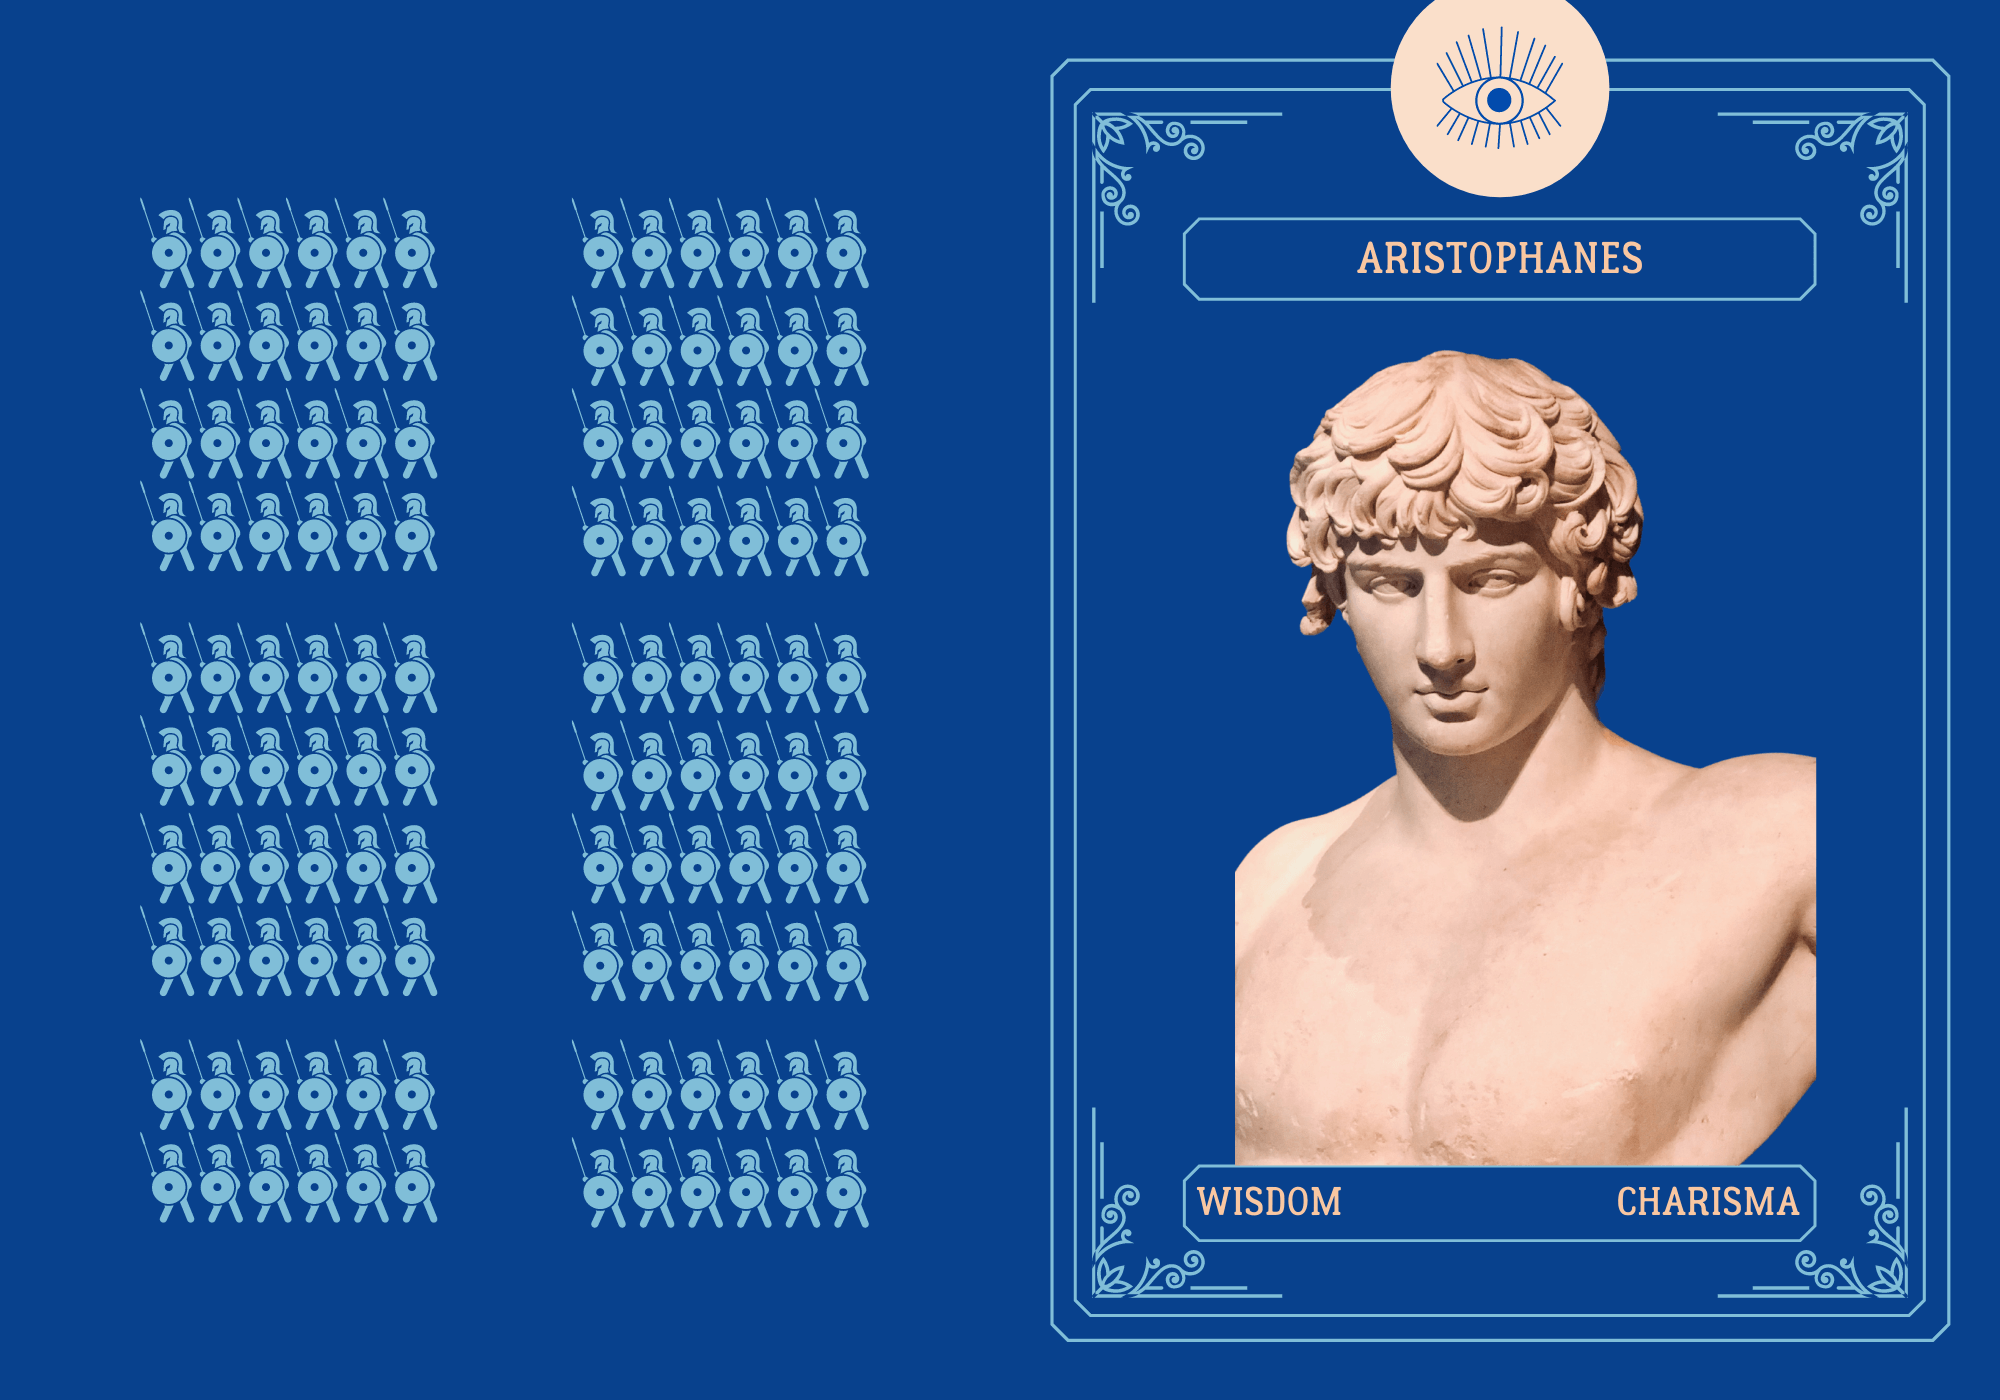 Card illustrating
            Aristophanes' features and attributes